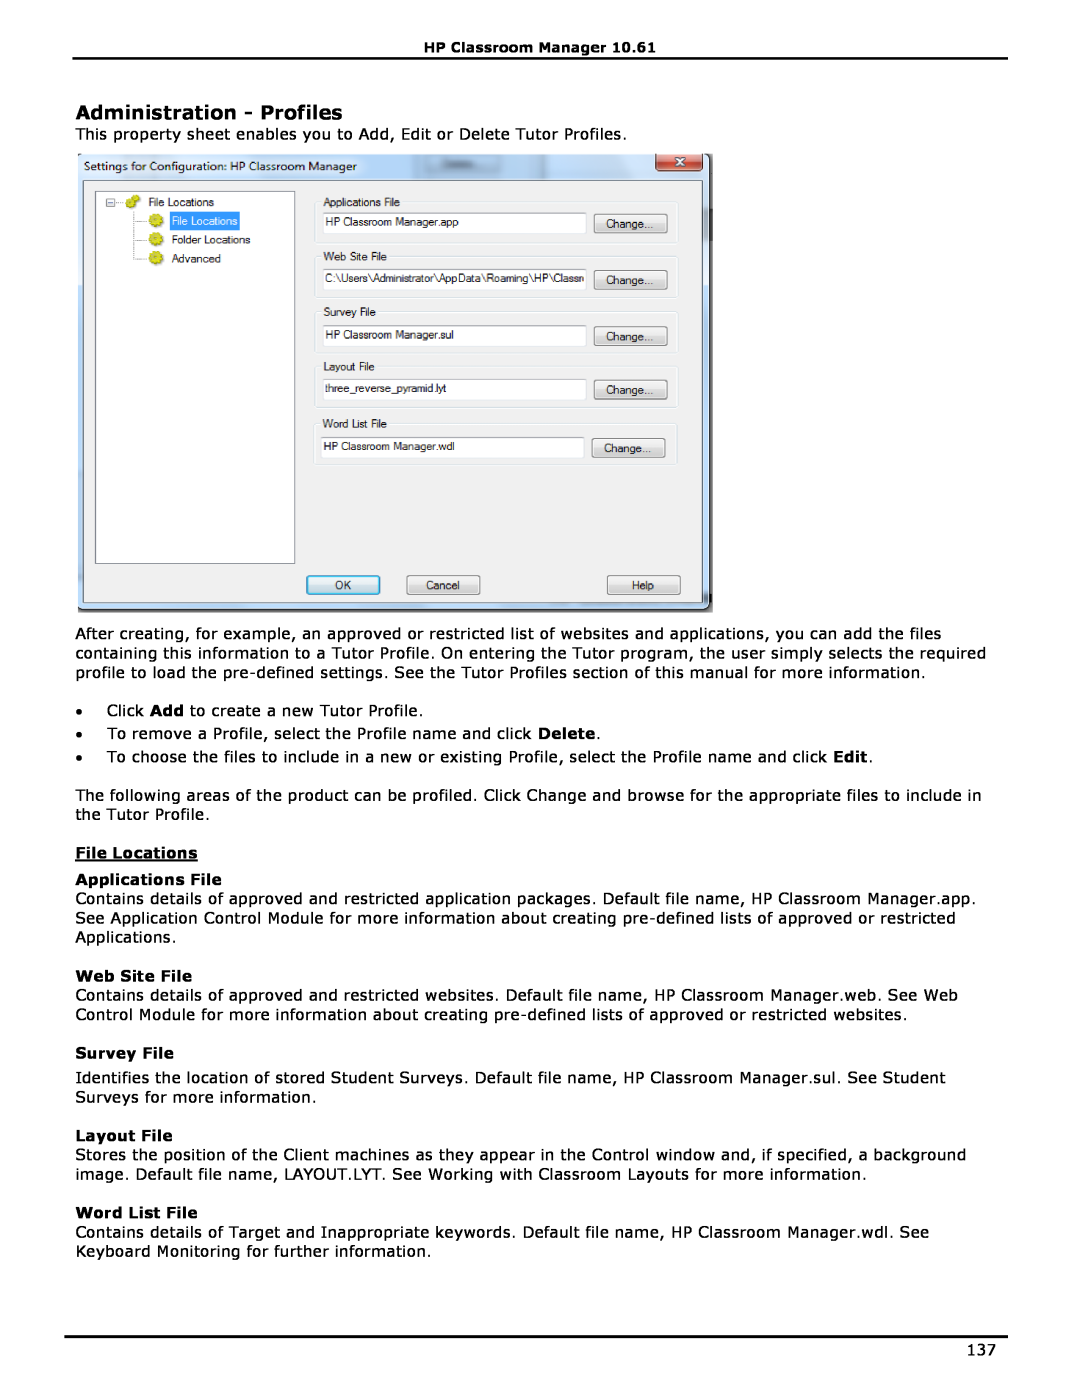 HP Classroom Manager Administration - Profiles, File Locations Applications File, Web Site File, Survey File, Layout File 